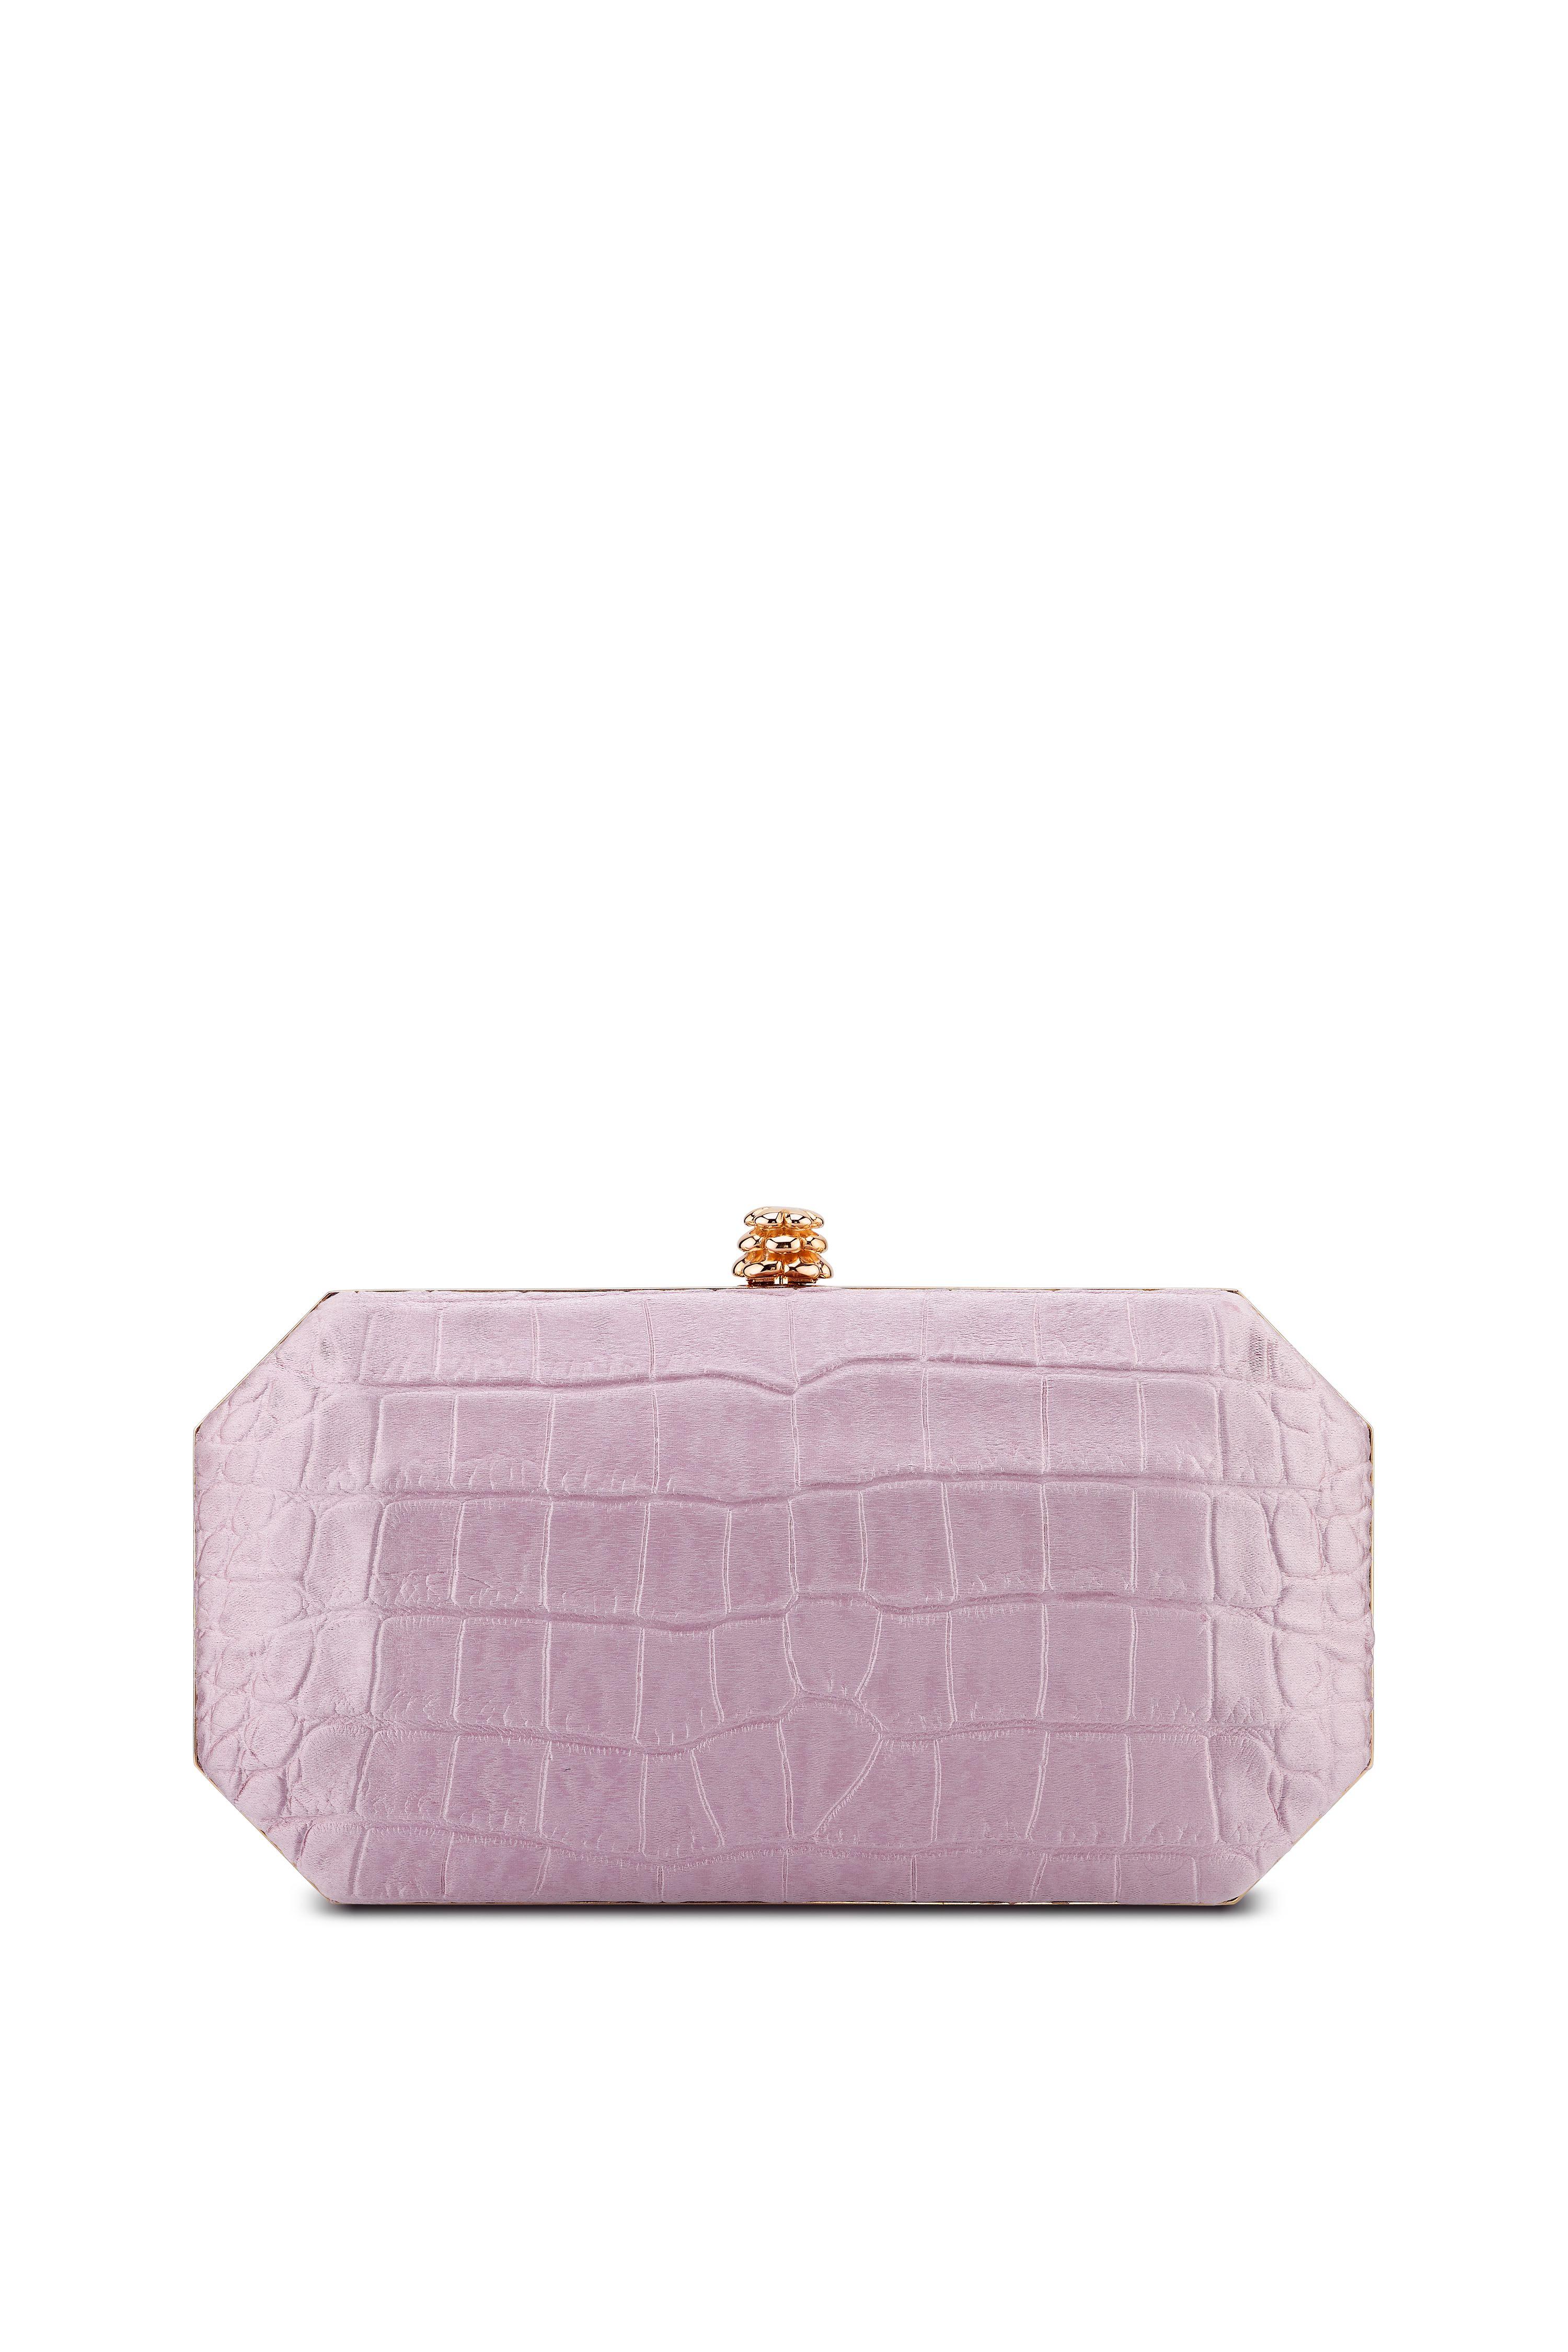 The Perry Small is featured in our Antique Pink stamped satin with rose gold hardware. The Perry is a hard-framed clutch designed with interior pockets and an optional rose gold cross-body chain. It's elegant emerald shape is inspired by Tyler's own